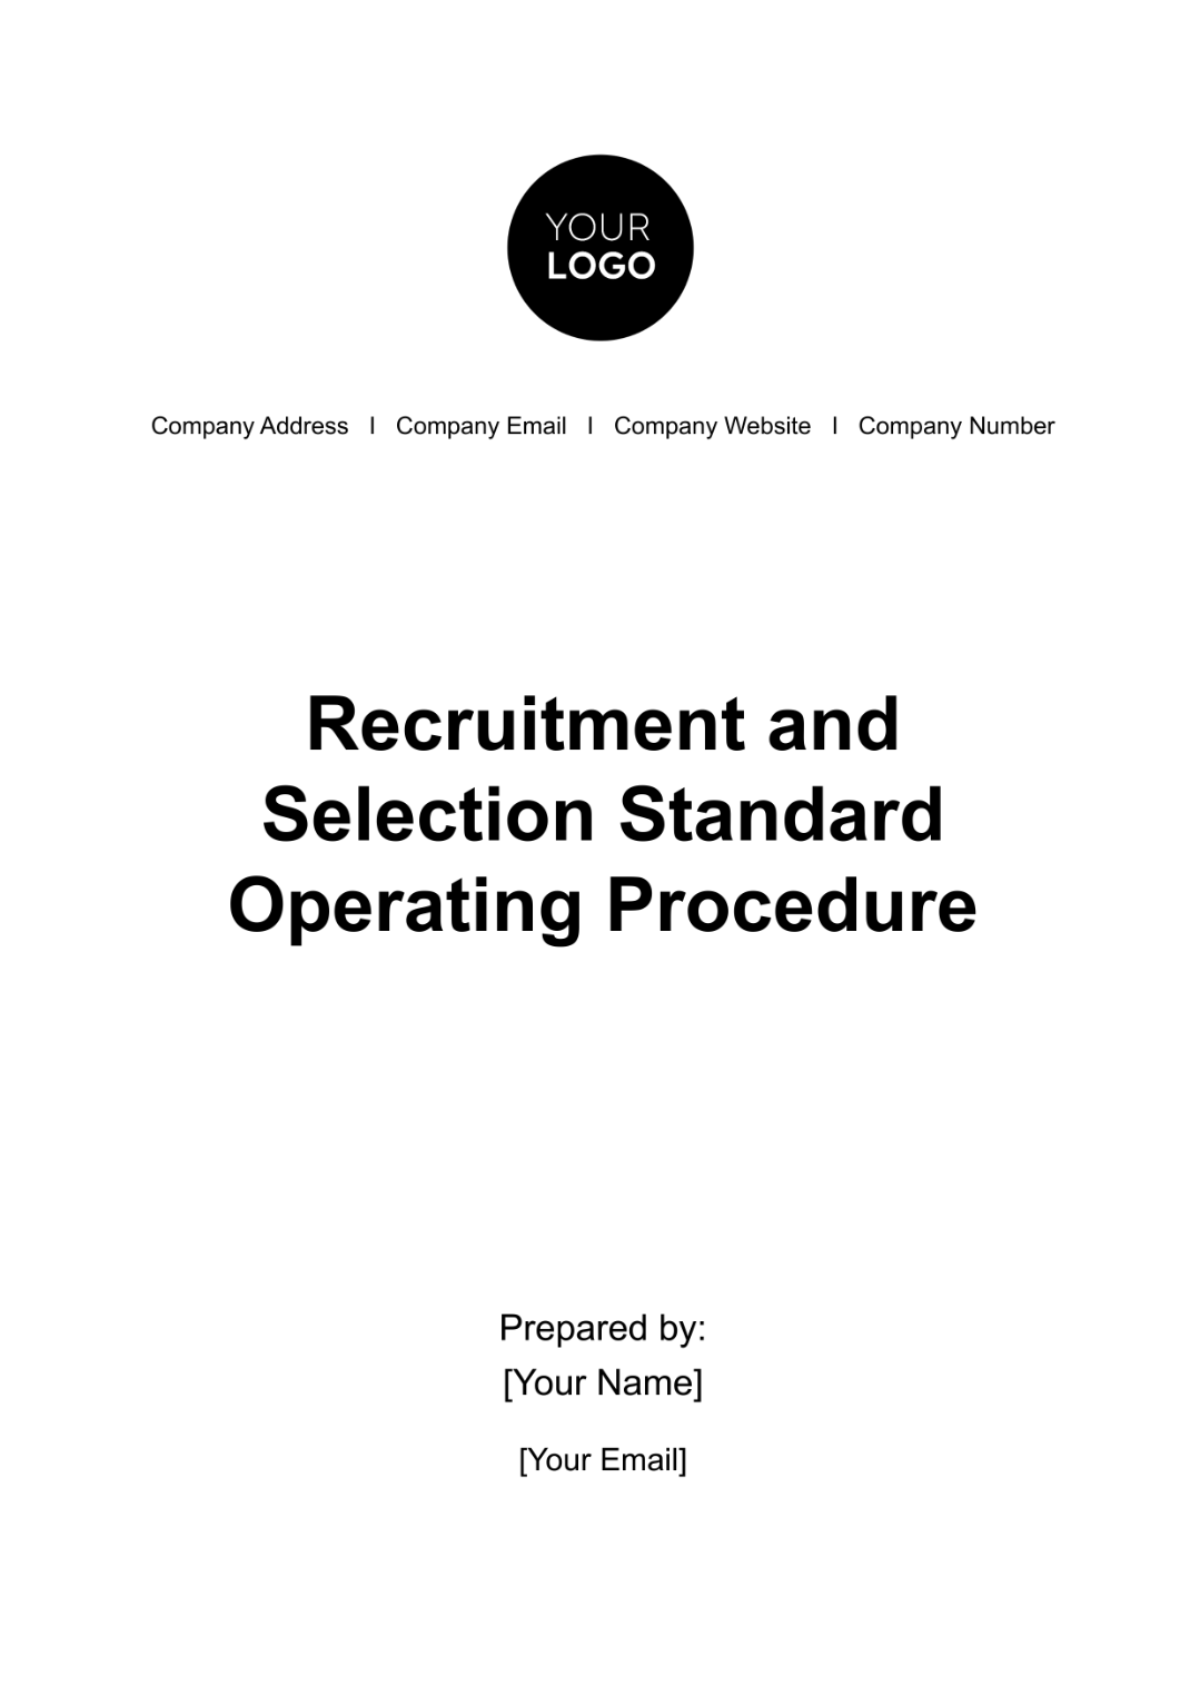 Recruitment and Selection Standard Operating Procedure (SOP) HR Template